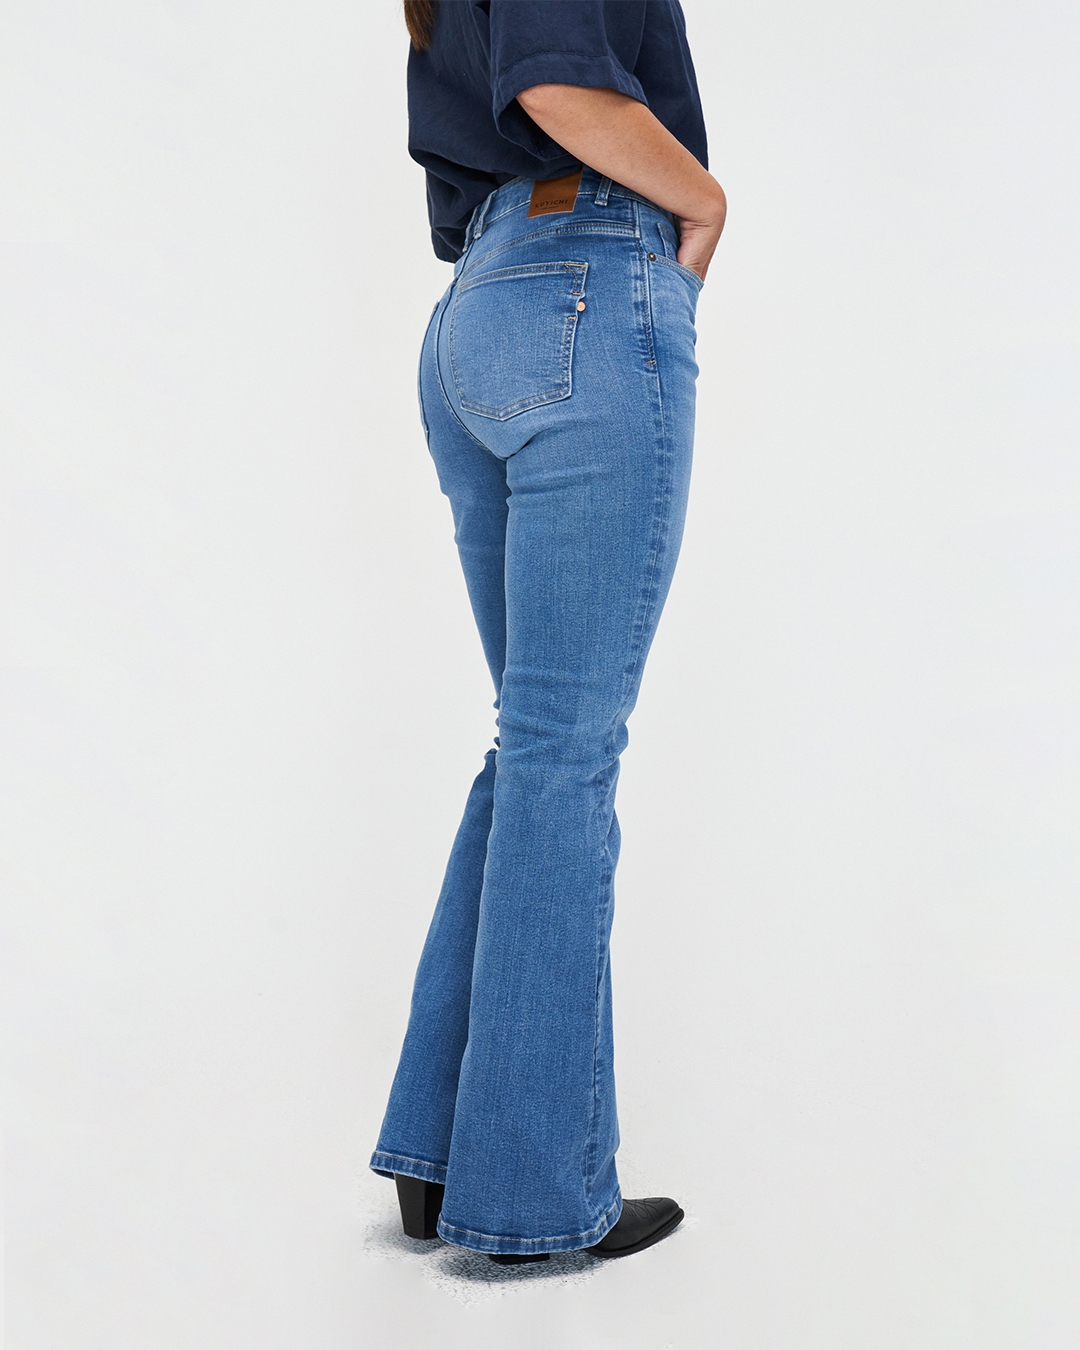 Jeans Lisette - Flare - Timed Out